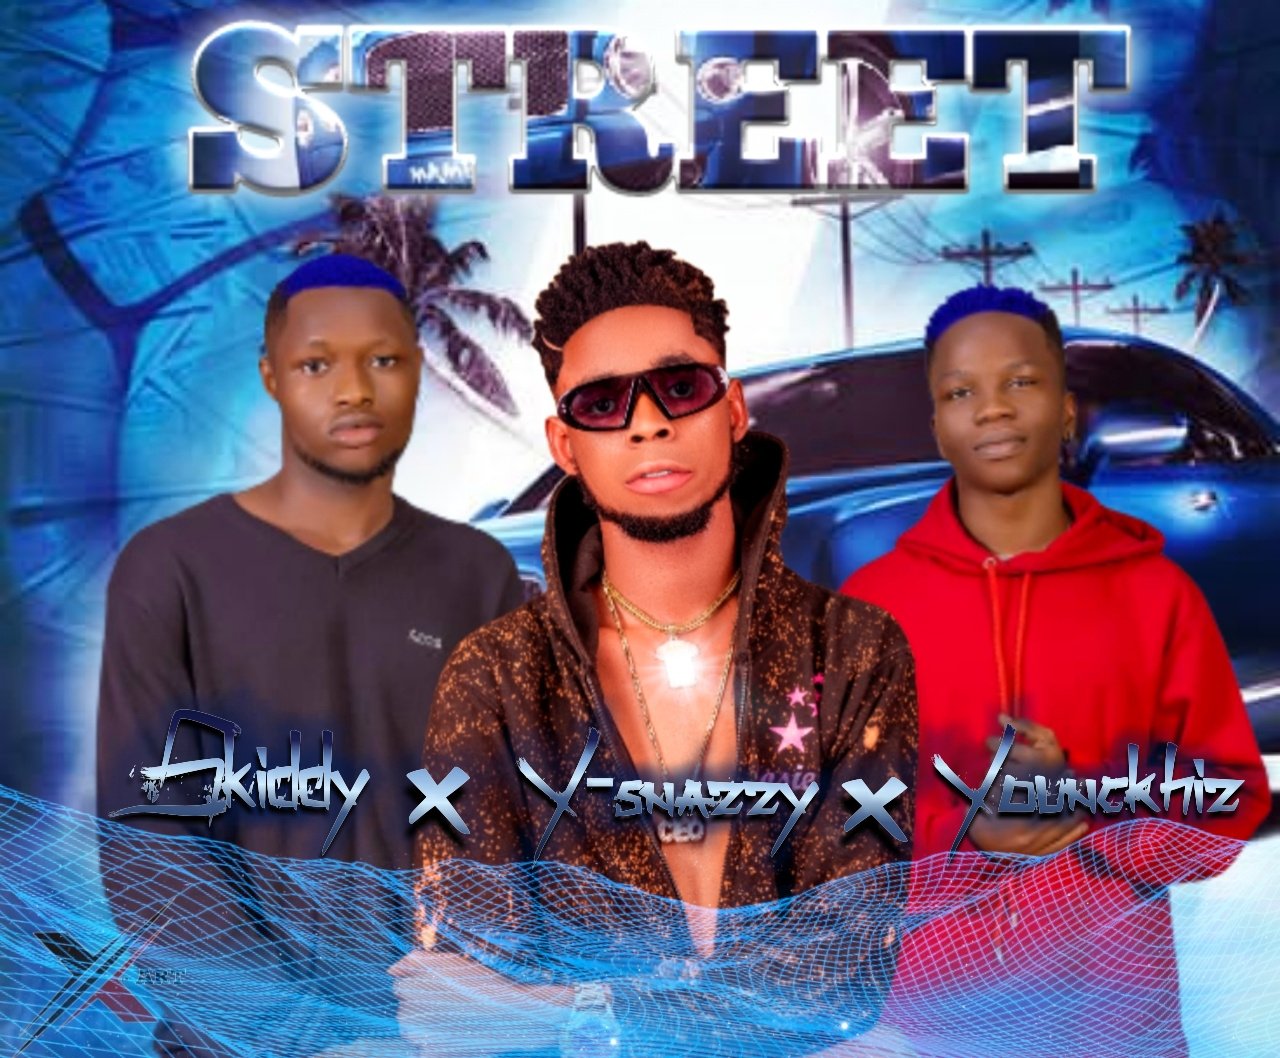 Street by Y Snazzy ft Youngkhiz and Kiddy